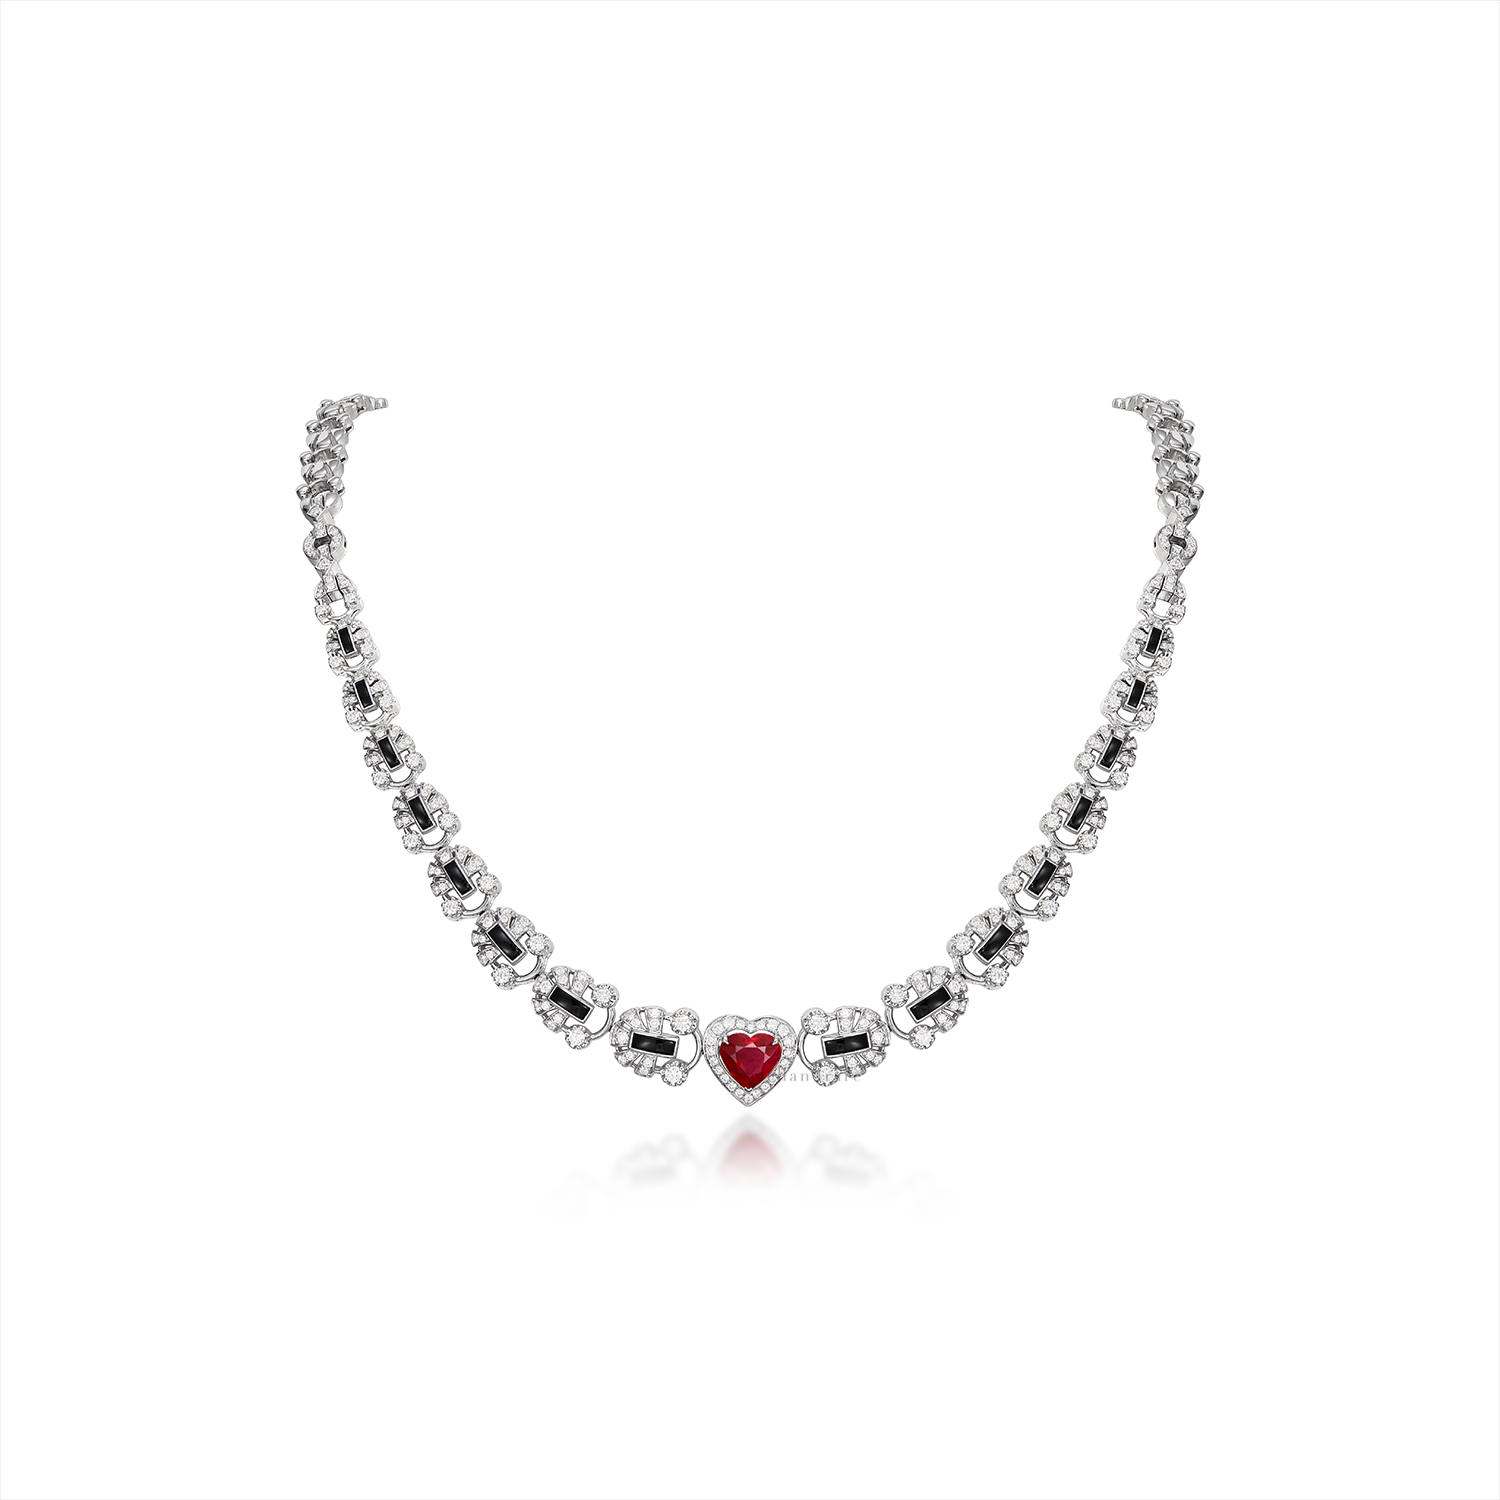 RUBY, ONYX AND DIAMOND NECKLACE